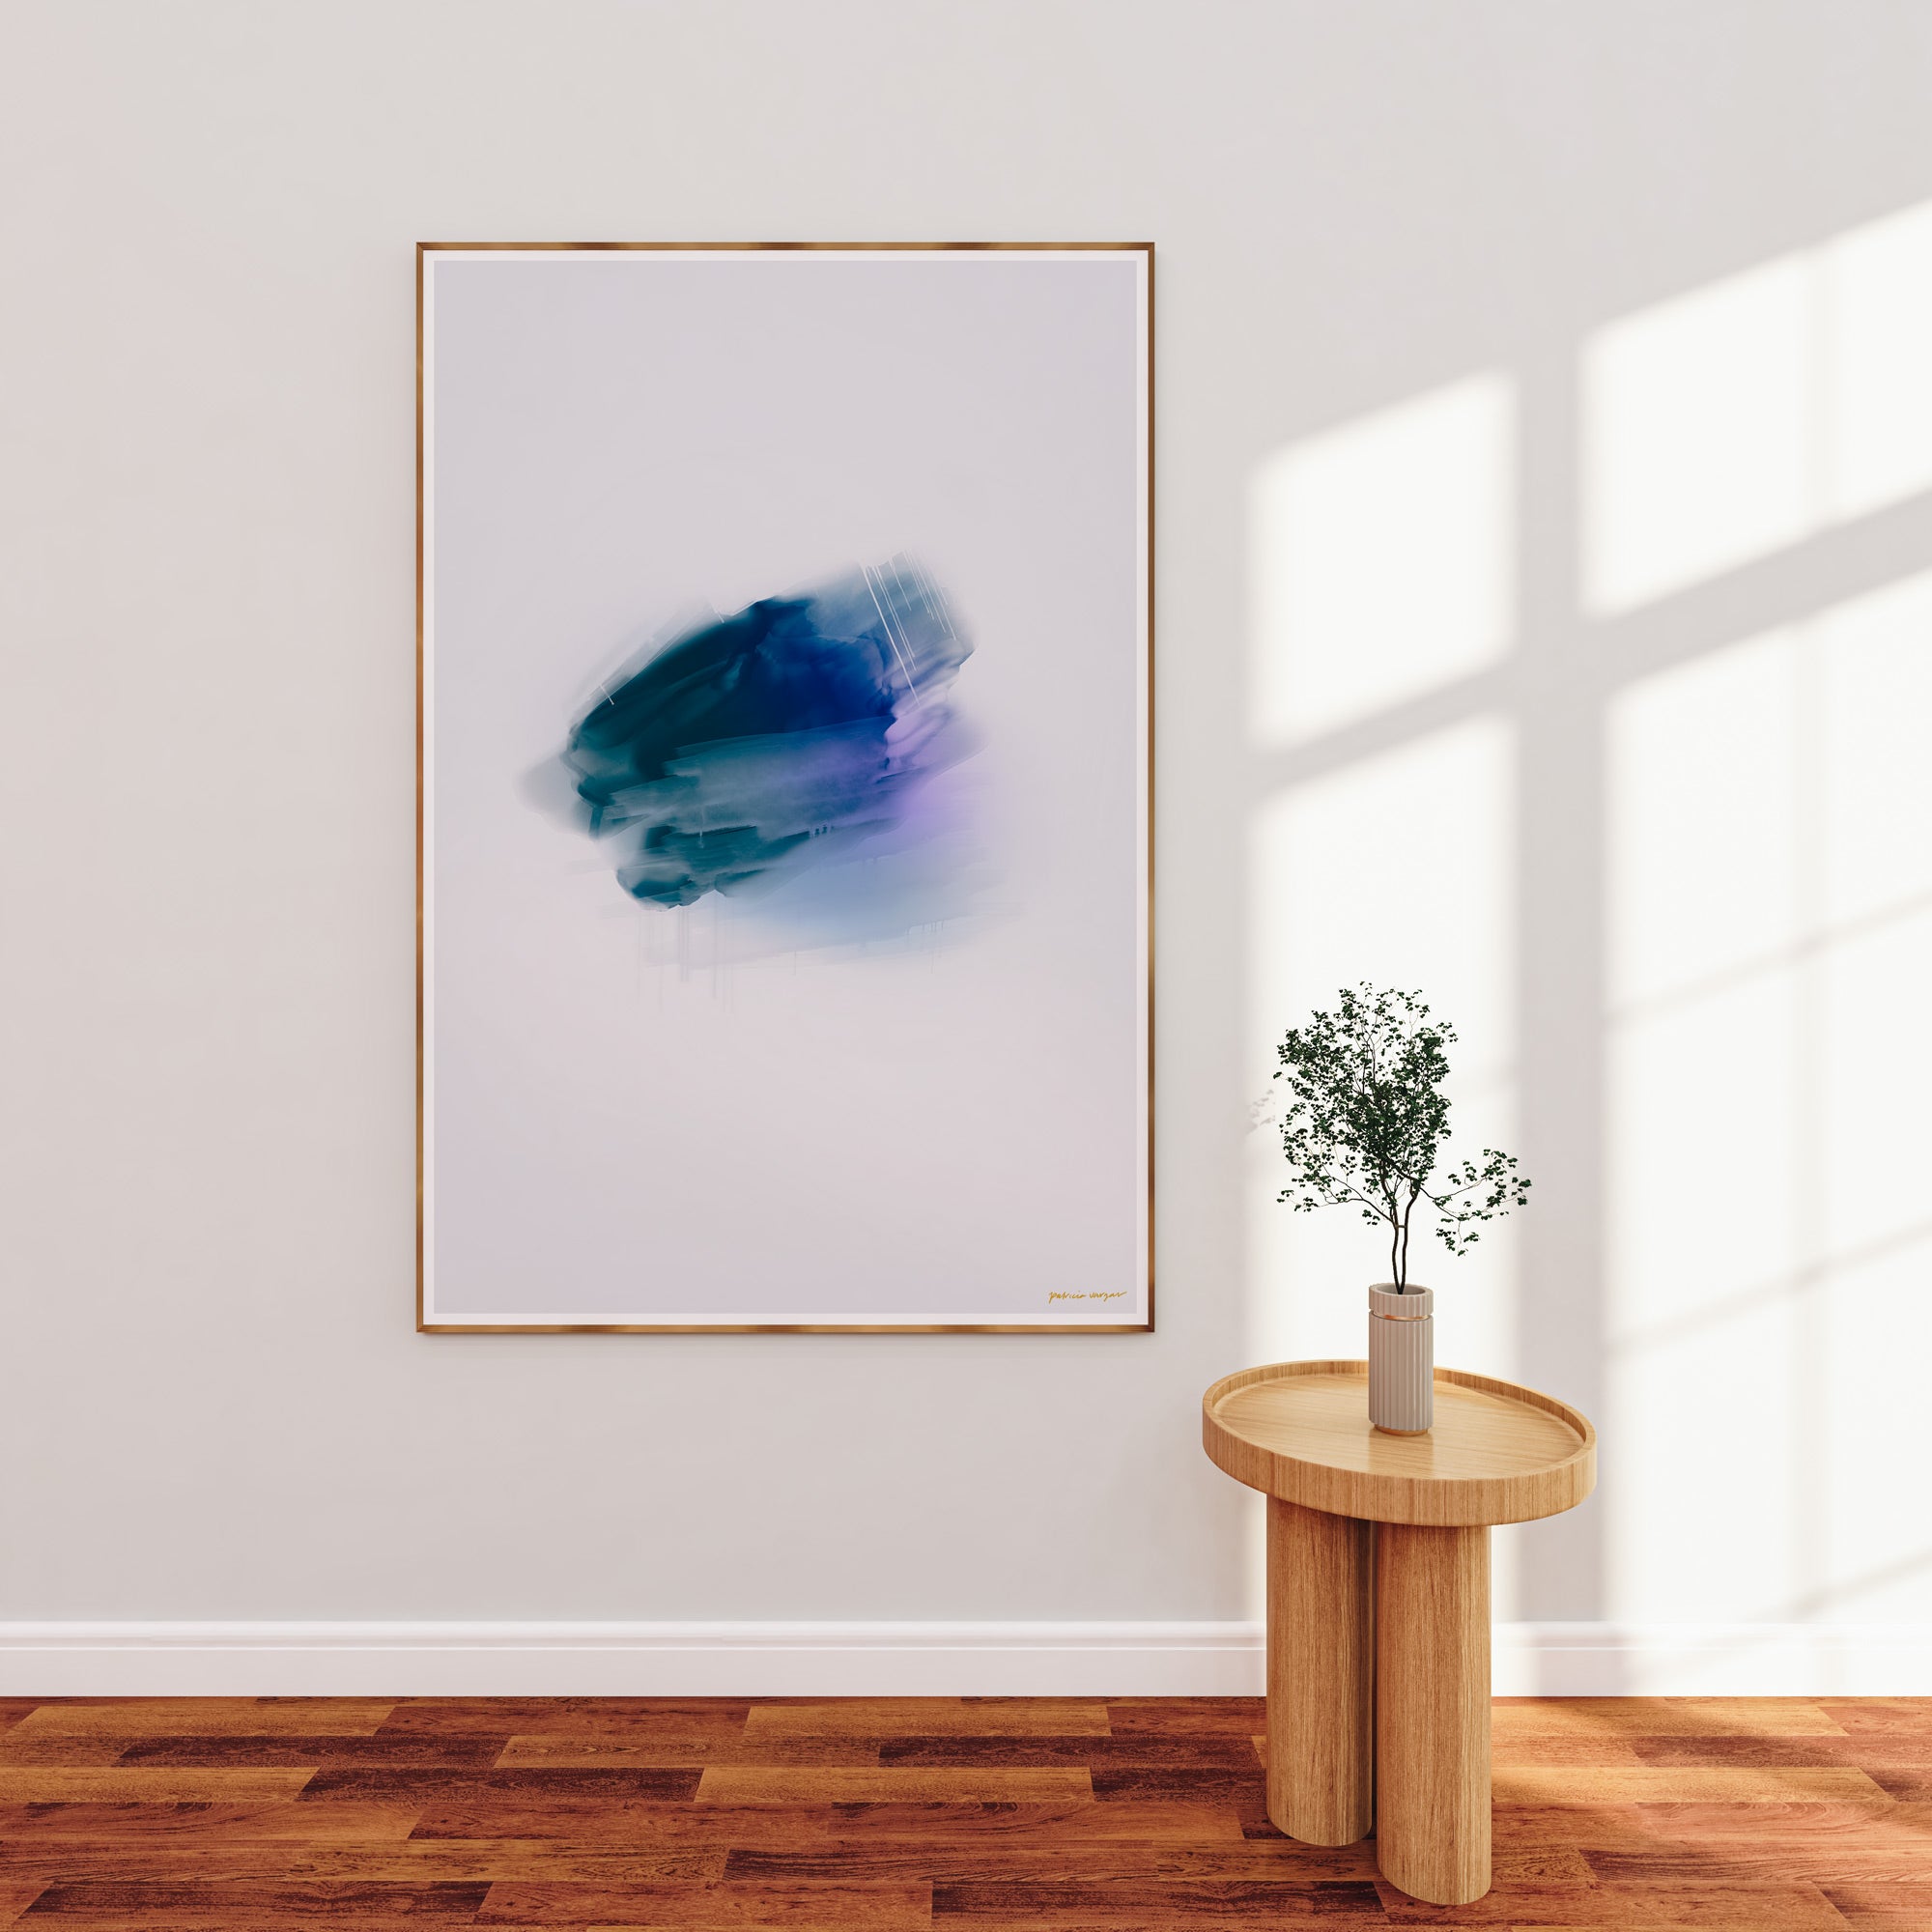 Prismatic No.4, blue colorful abstract wall art print by Parima Studio. Oversize art for living room